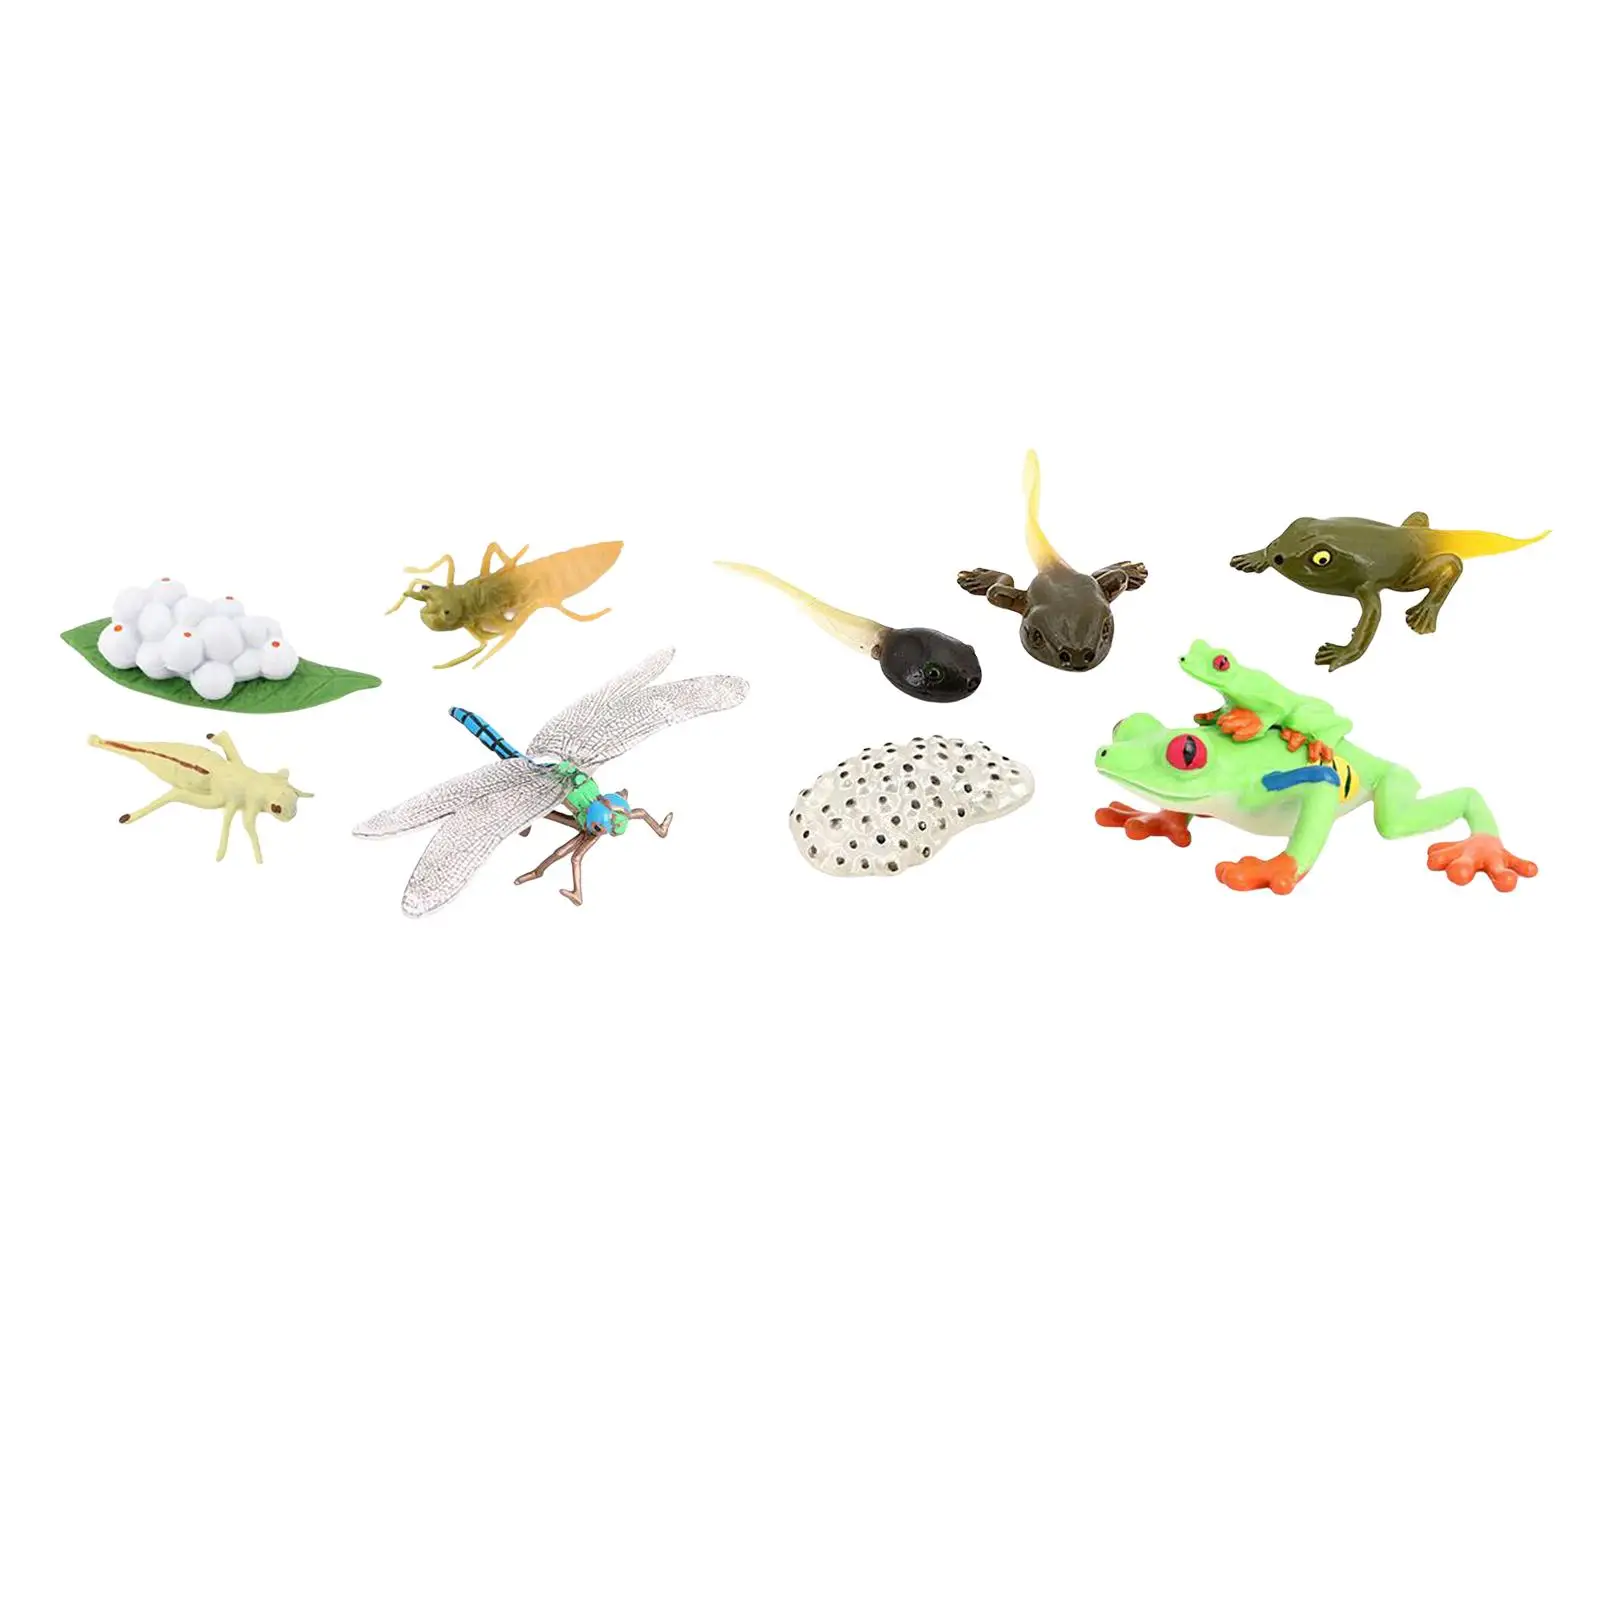 Life Cycle Figurines Dragonfly Figures Early Education for Children Toddlers